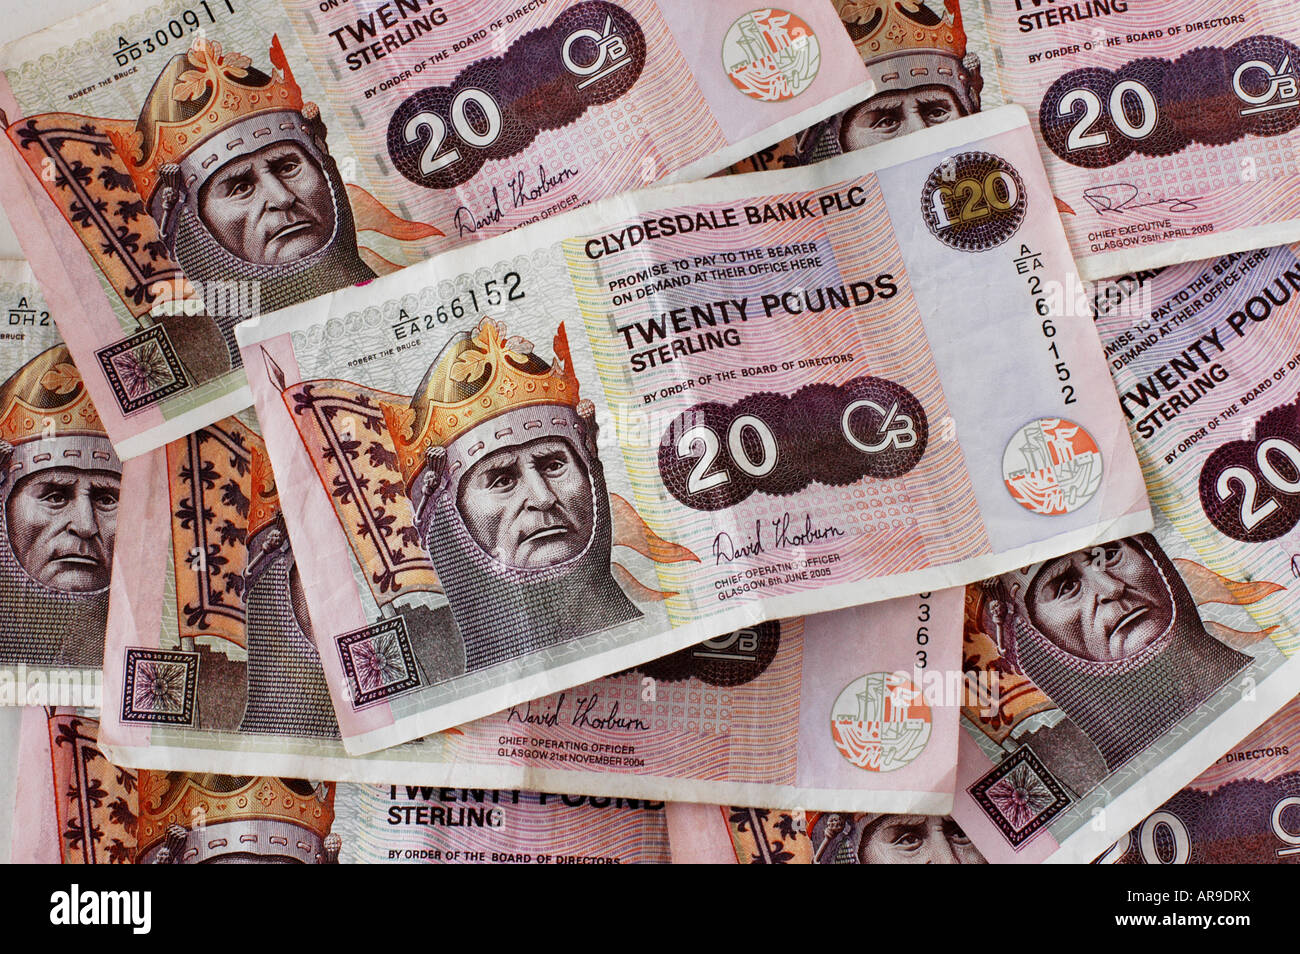 Clydesdale Bank £20 banknotes Stock Photo